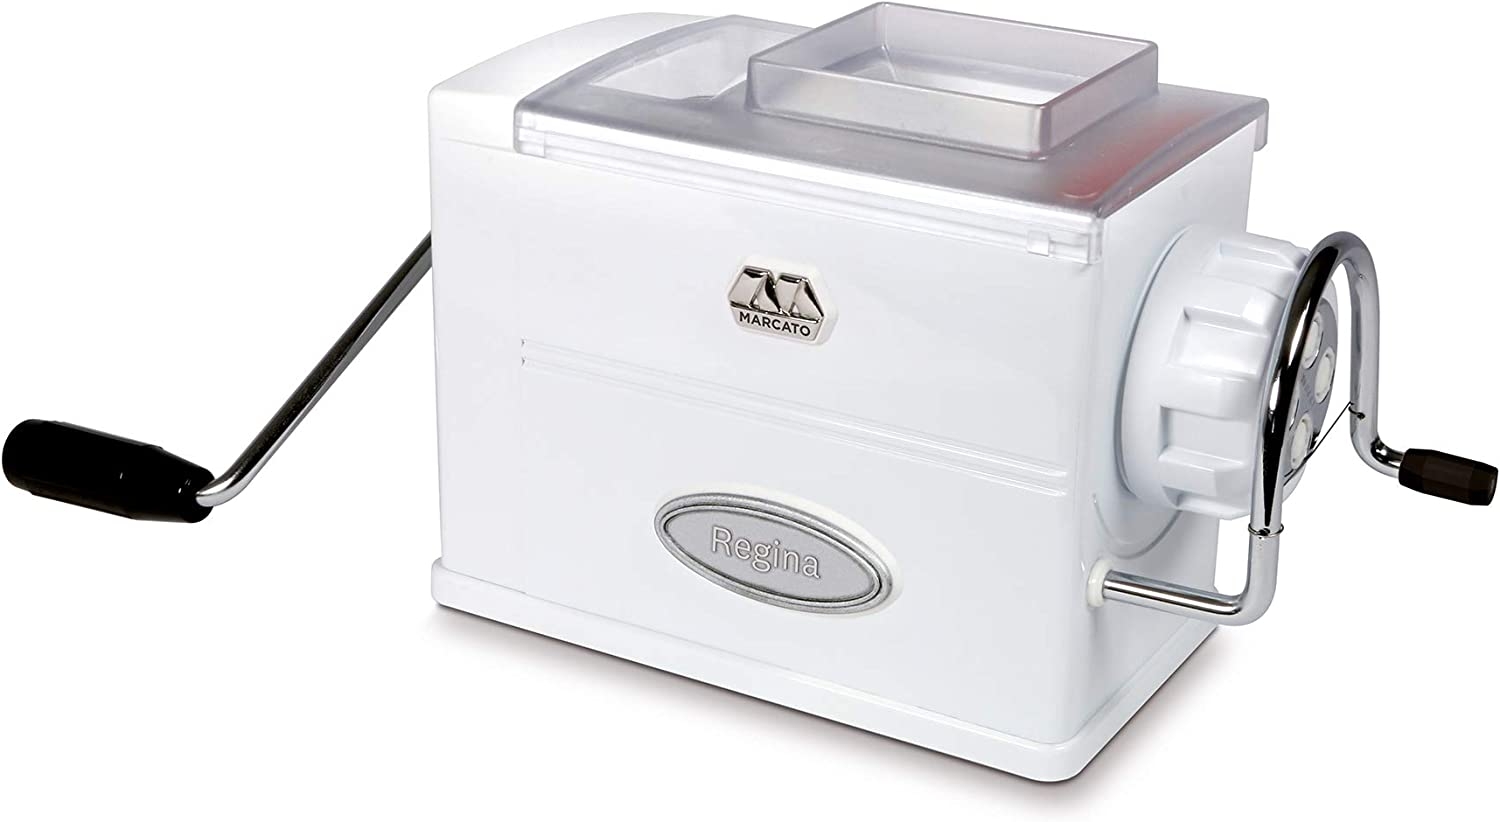 Marcato Atlas Regina Extruder Pasta Maker, Made in Italy, Chrome-Plated Steel & Shockproof Plastic, Includes 5 Dies &